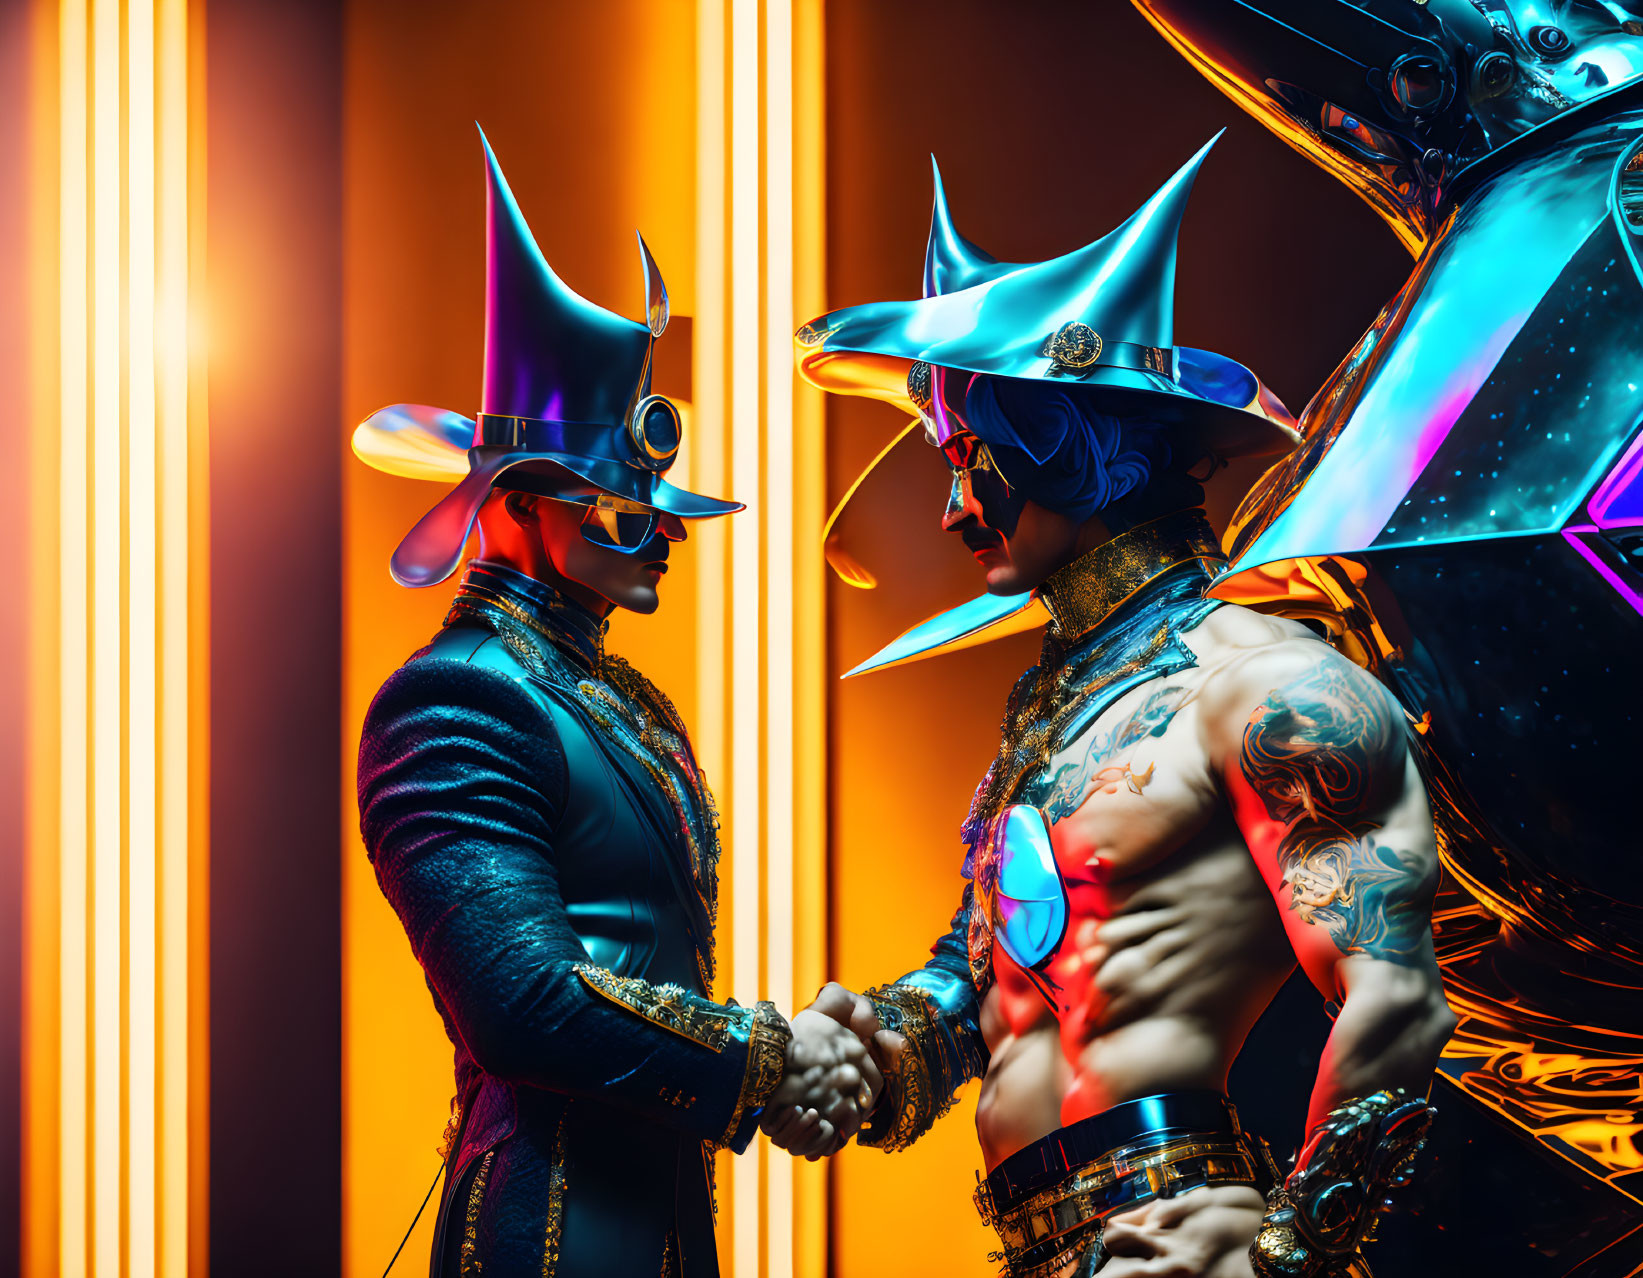 Two individuals in futuristic costumes shaking hands amidst vibrant orange light.